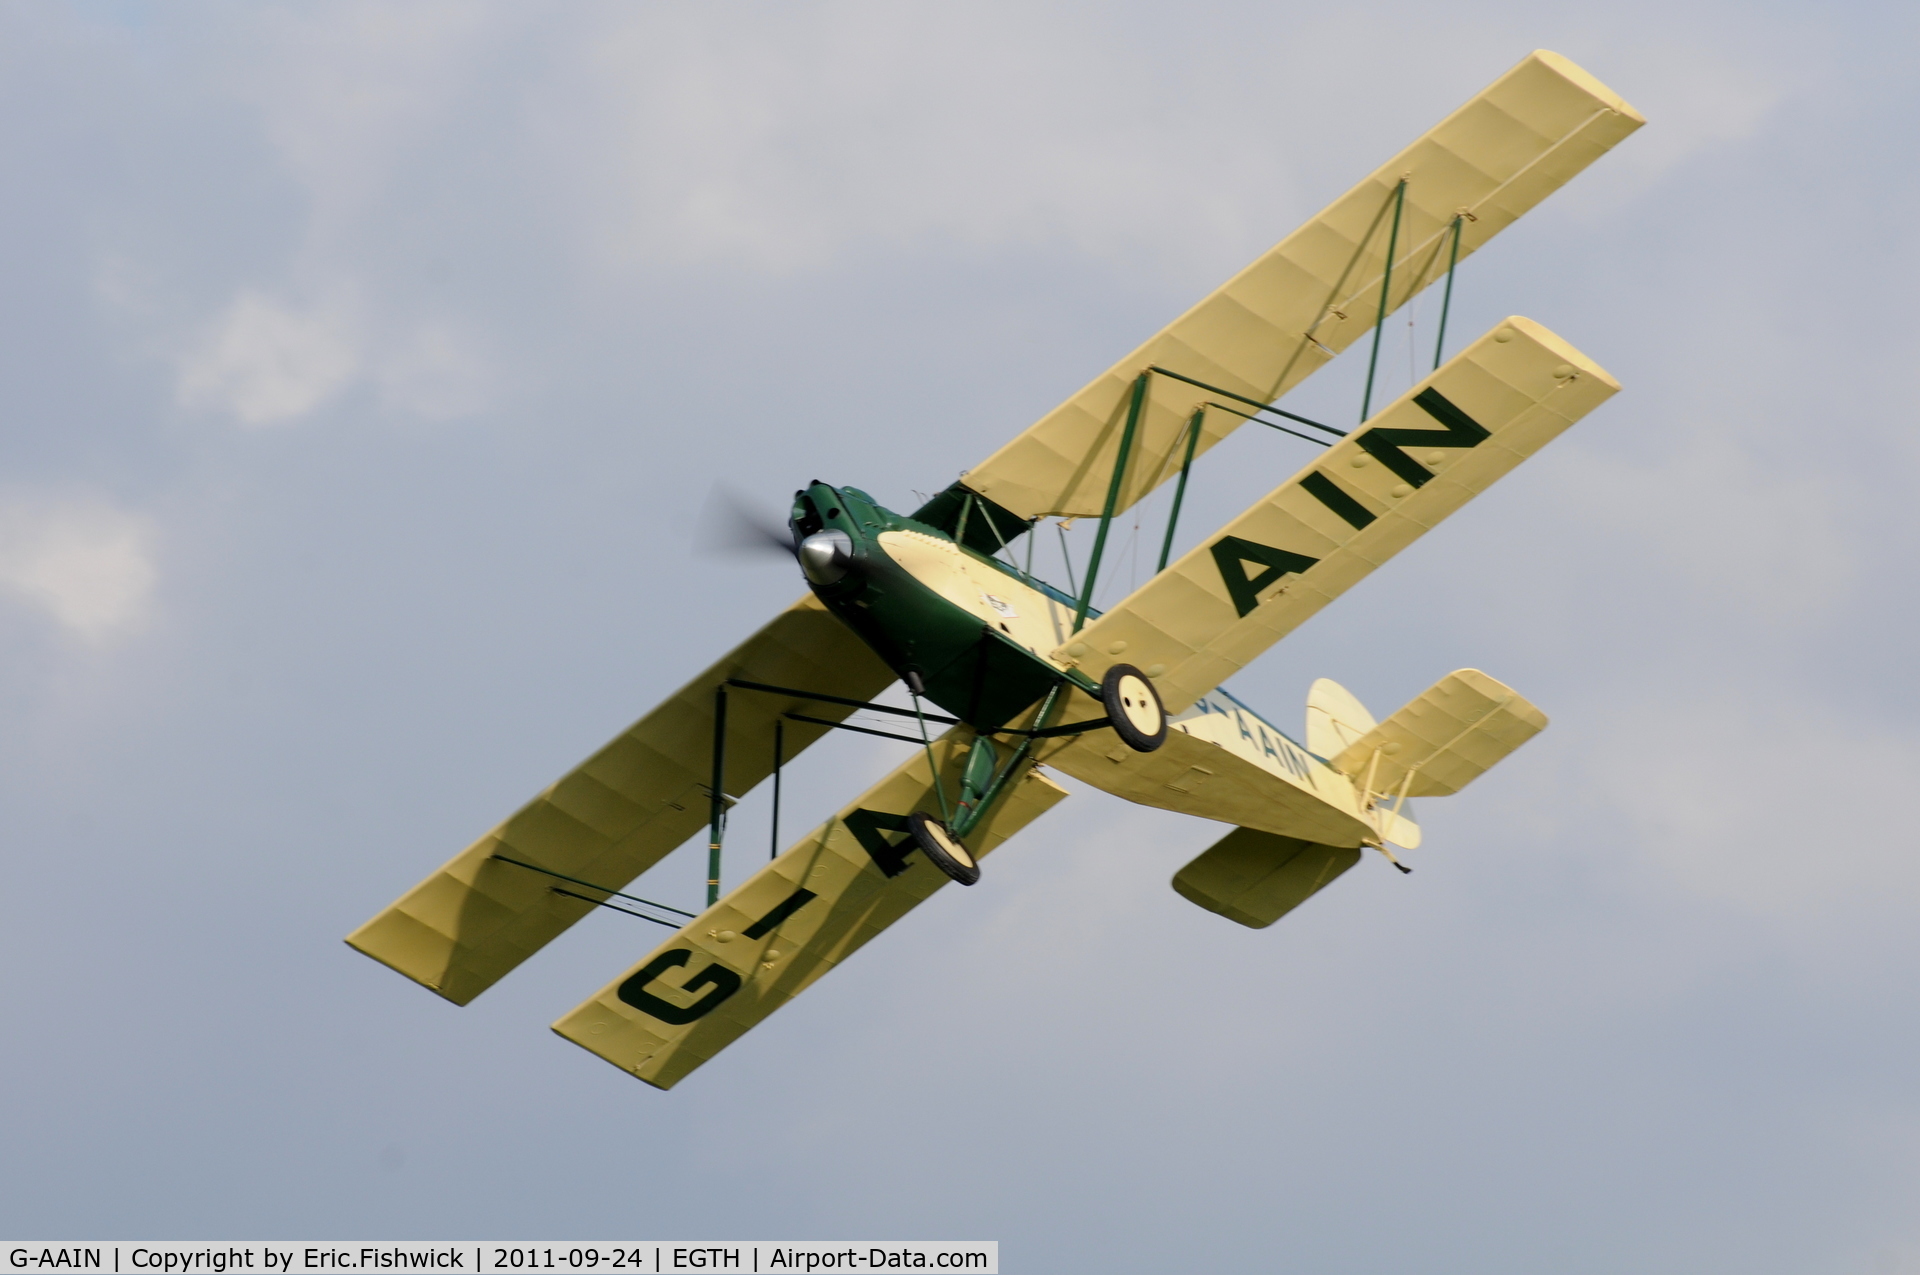 G-AAIN, 1934 Parnall Elf II C/N J.6, 44. G-AAIN at the glorious Shuttleworth Uncovered Air Display, September 2011